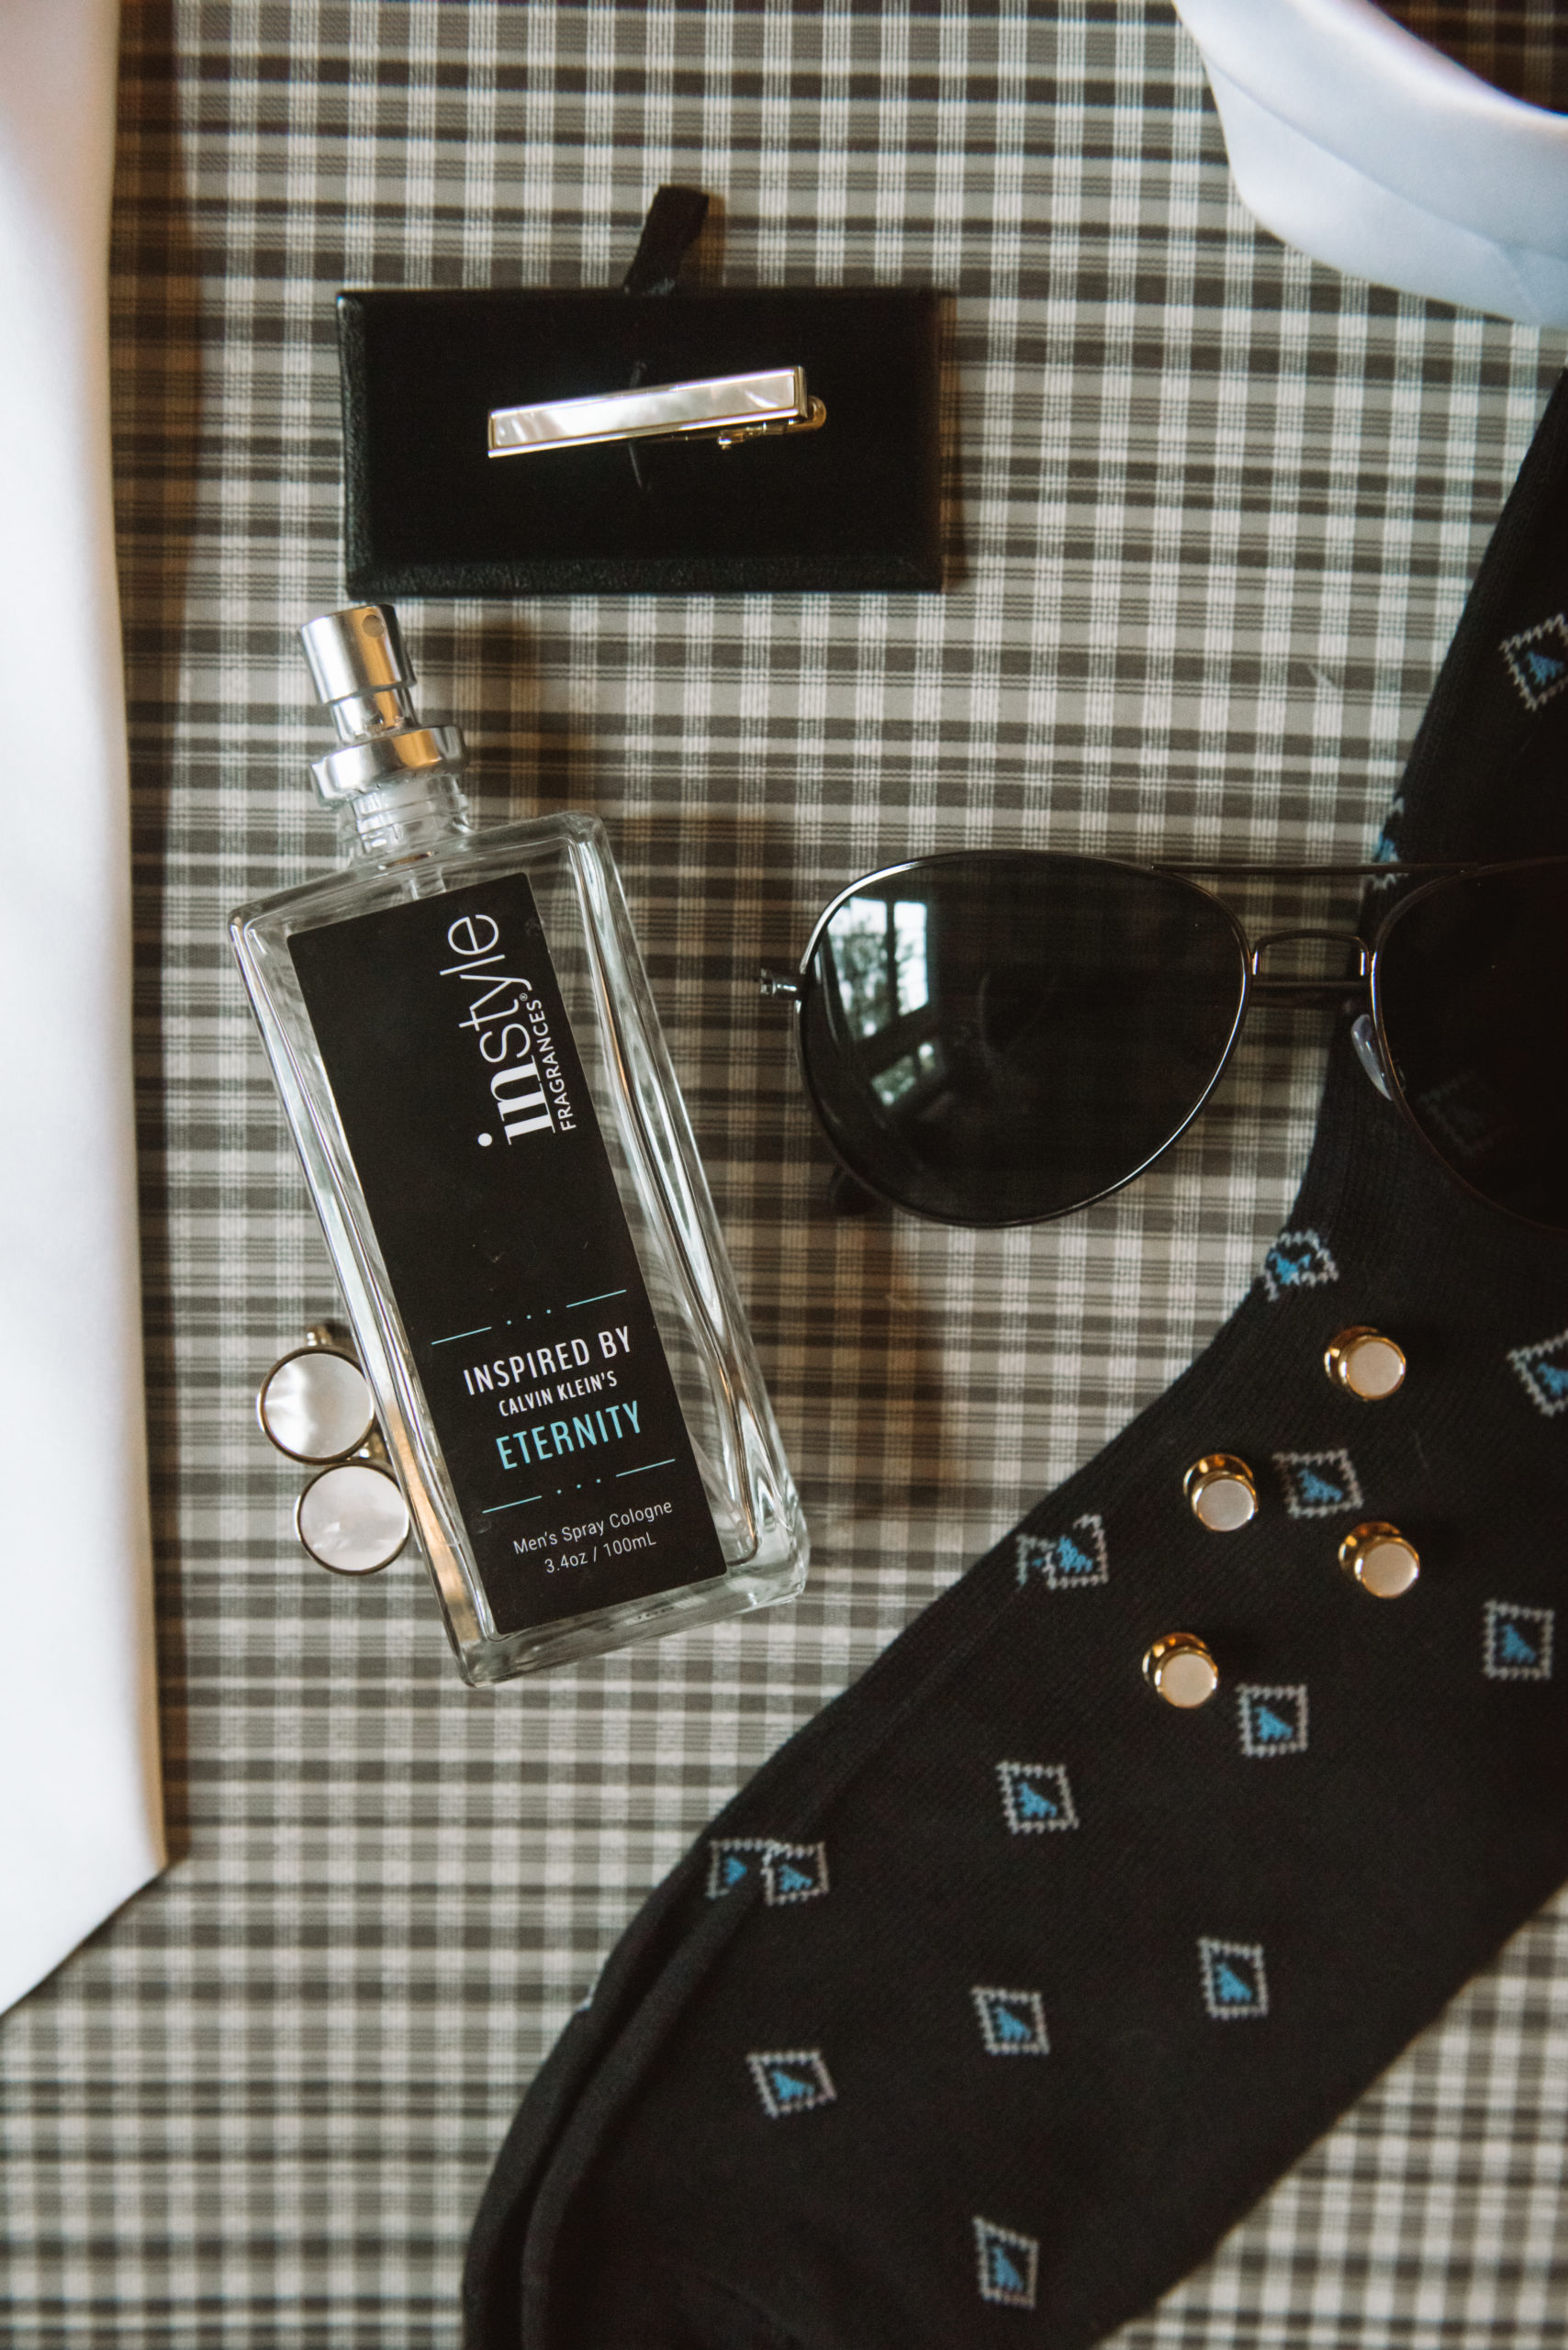 Close up detail of the groom's details including a bottle of cologne, printed socks, Ray Ban aviator sunglasses, white tie, and matching tie clip and cufflinks. Everything is set atop a green, black, and white gingham ottoman.